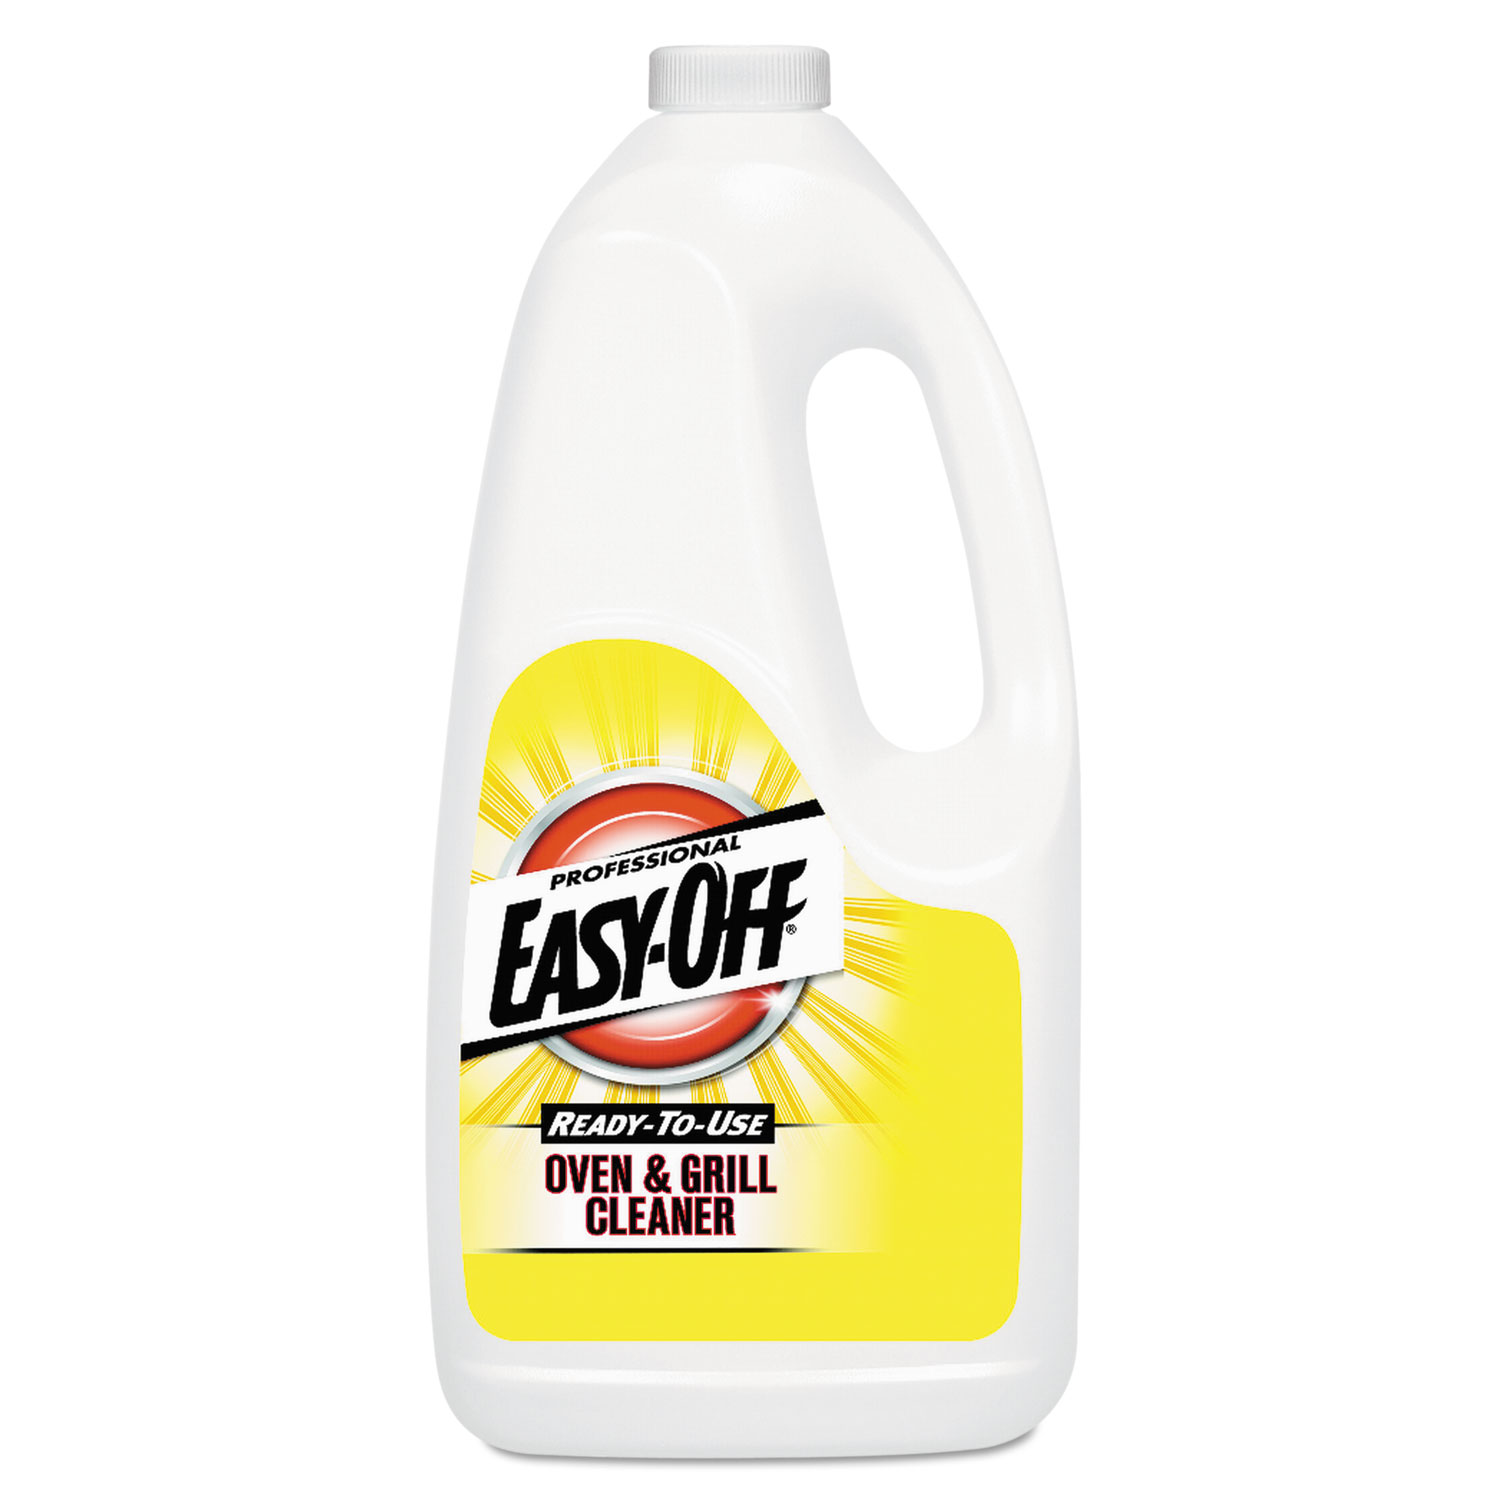  Professional EASY-OFF 62338-80689 Ready-to-Use Oven and Grill Cleaner, Liquid, 2qt Bottle, 6/Carton (RAC80689CT) 